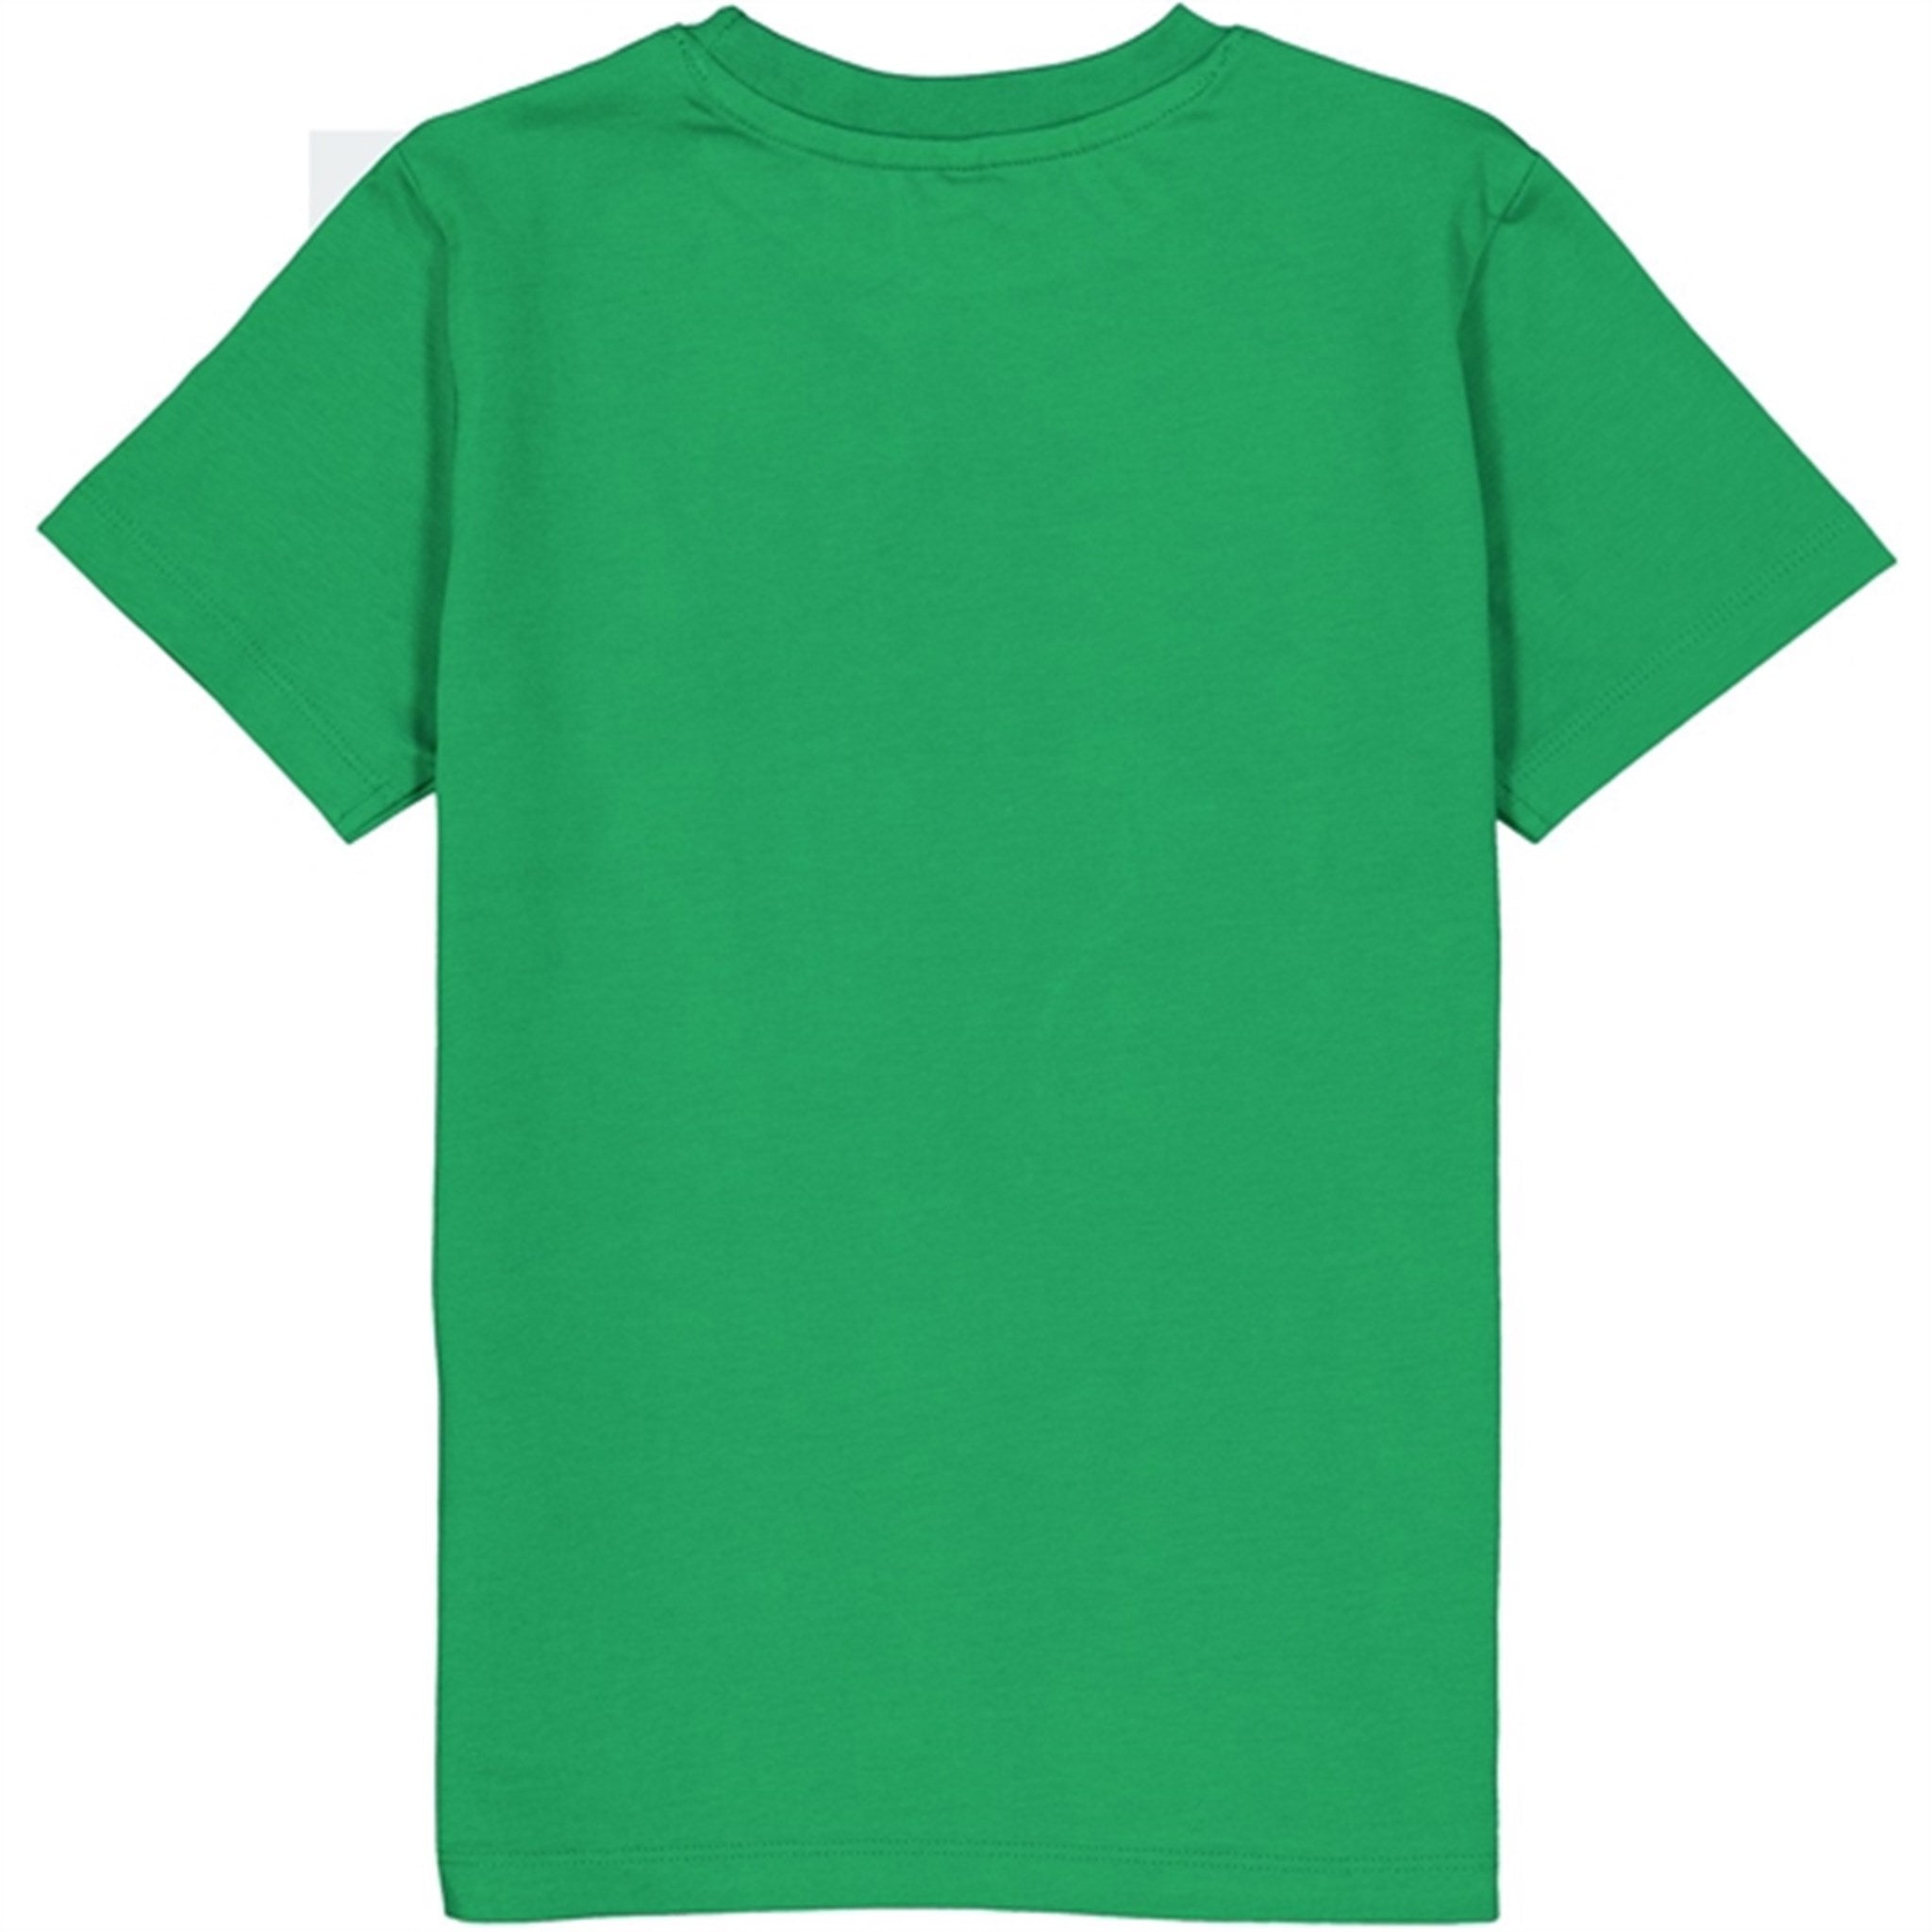 The New Bright Green Jennabell T-shirt 3